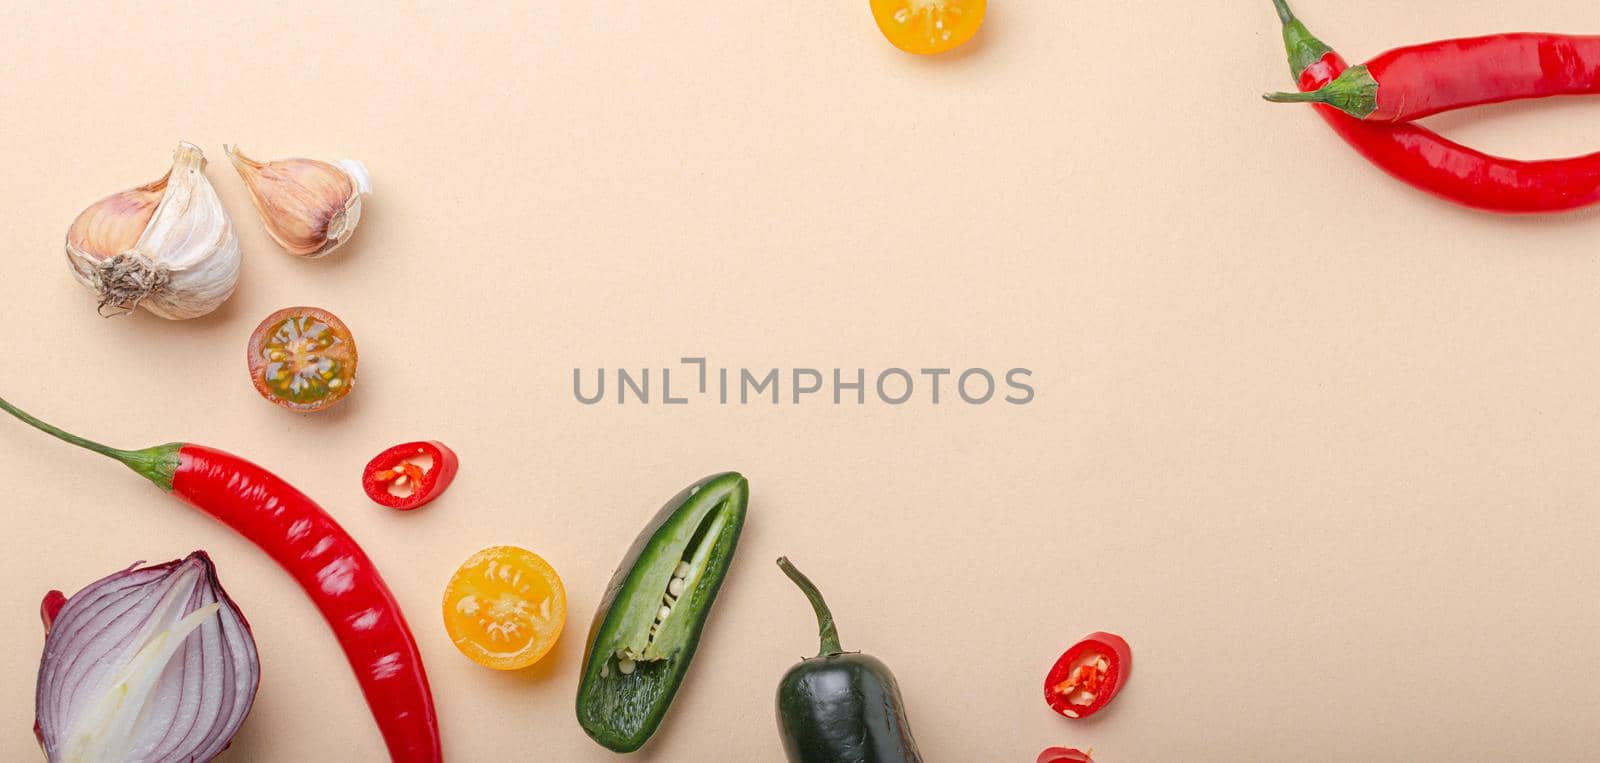 Creative cooking healthy organic food concept background made of colourful fruit and vegetables by its_al_dente